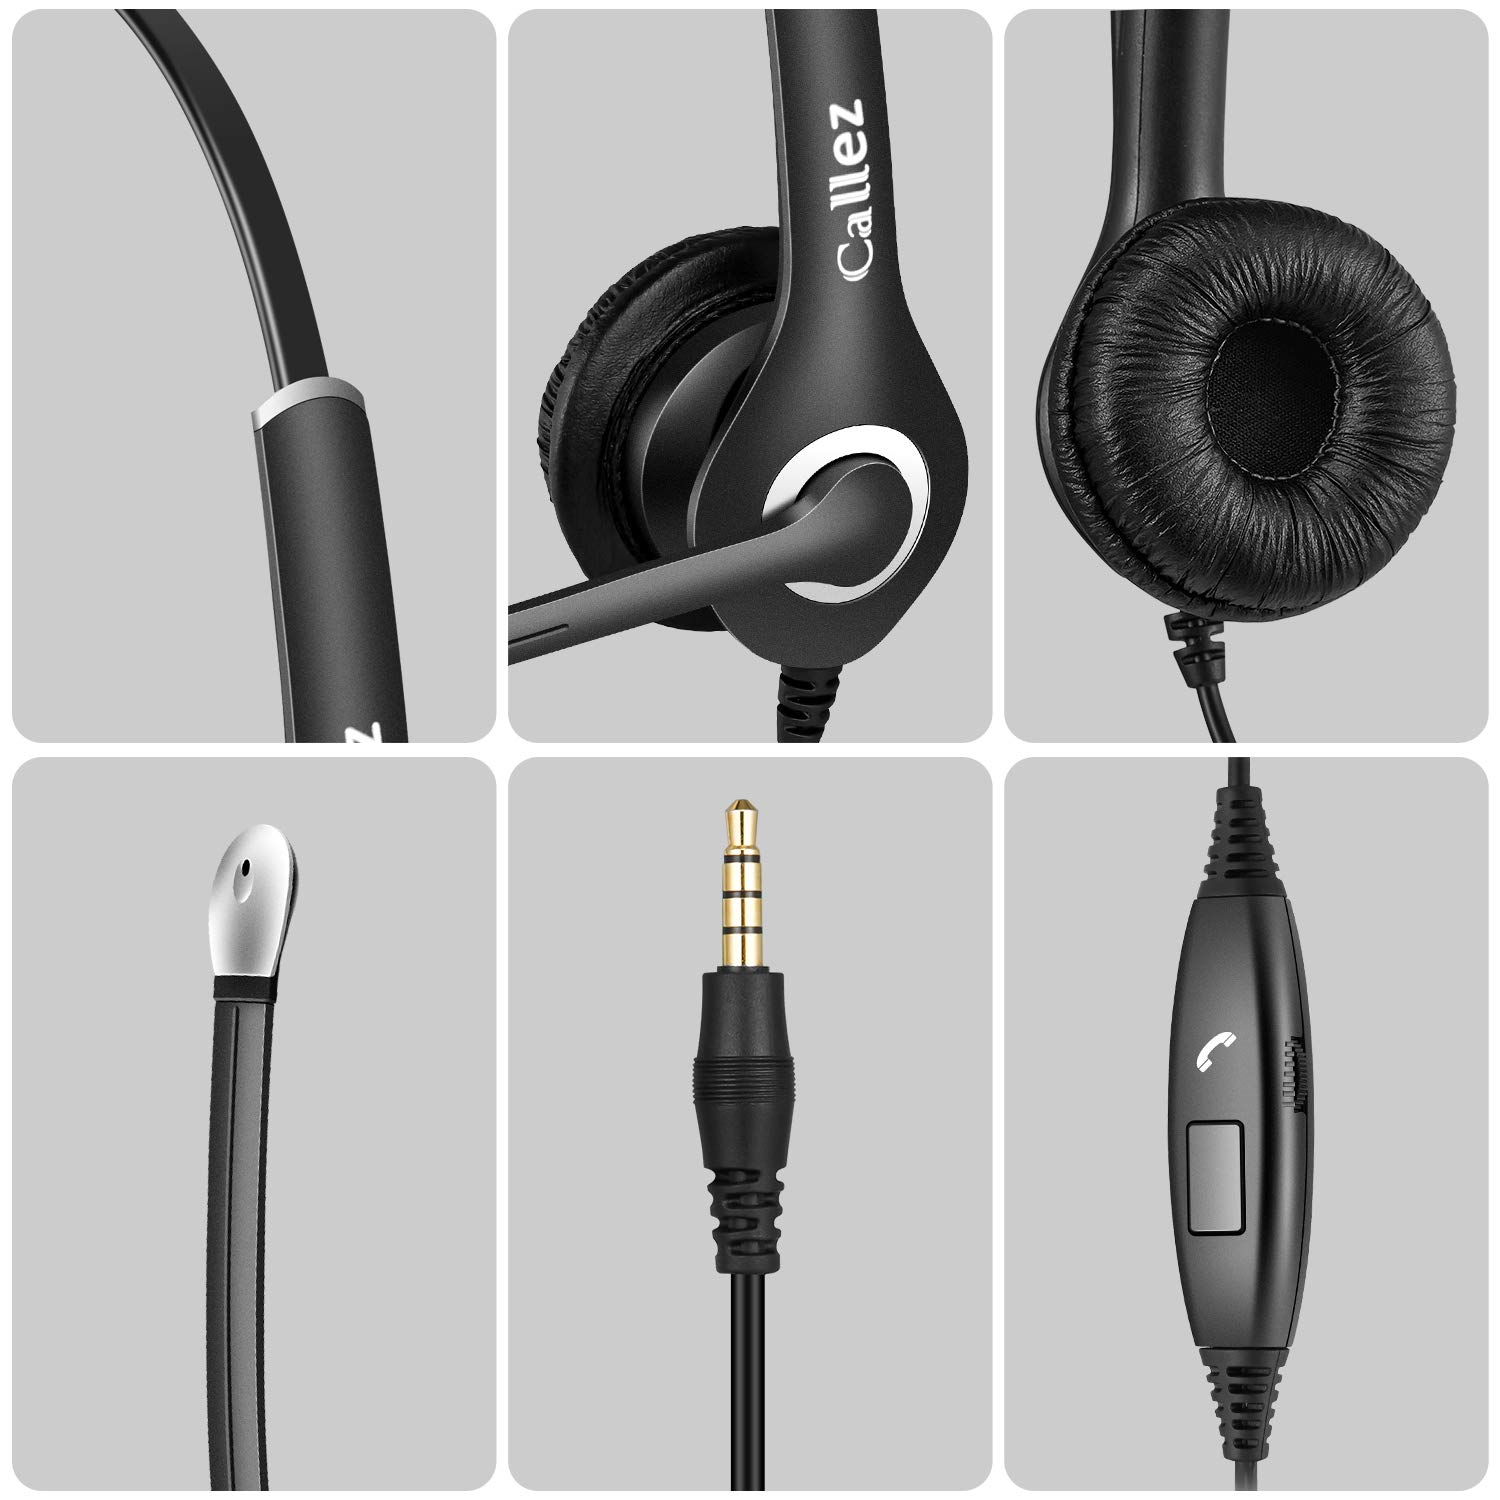 Computer Headset with Microphone Noise Cancelling, 3.5mm Cell Phone Headsets for iPhone Samsung Laptop PC Tablet Skype Webinar Office Business Call Center, Clearer Voice, Ultra Comfort